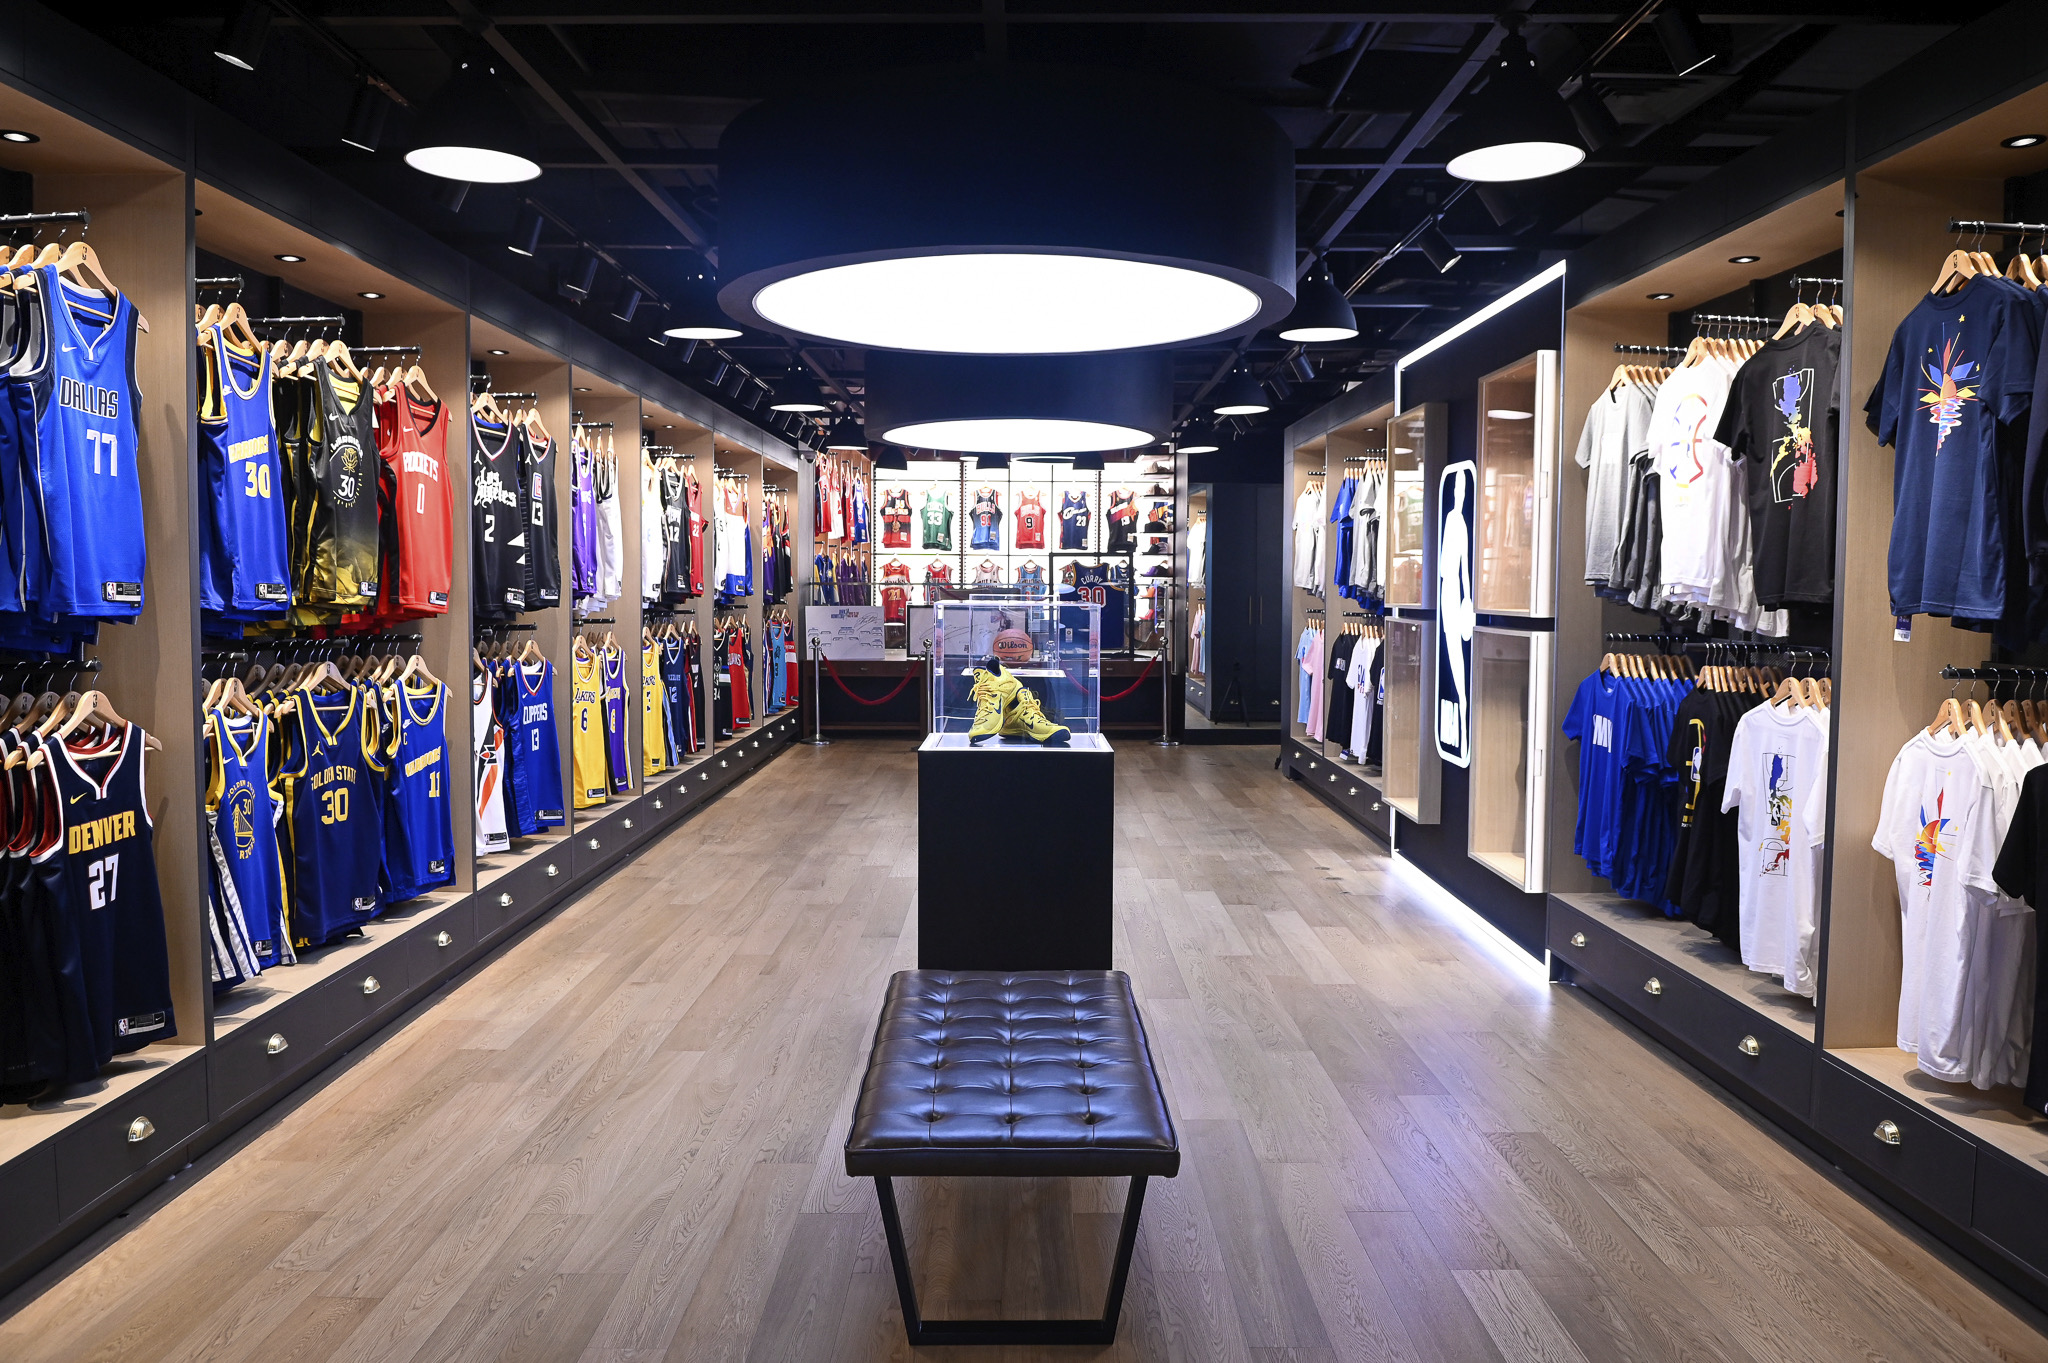 Largest NBA Store in the Philippines Just Opened in SM Mall of Asia